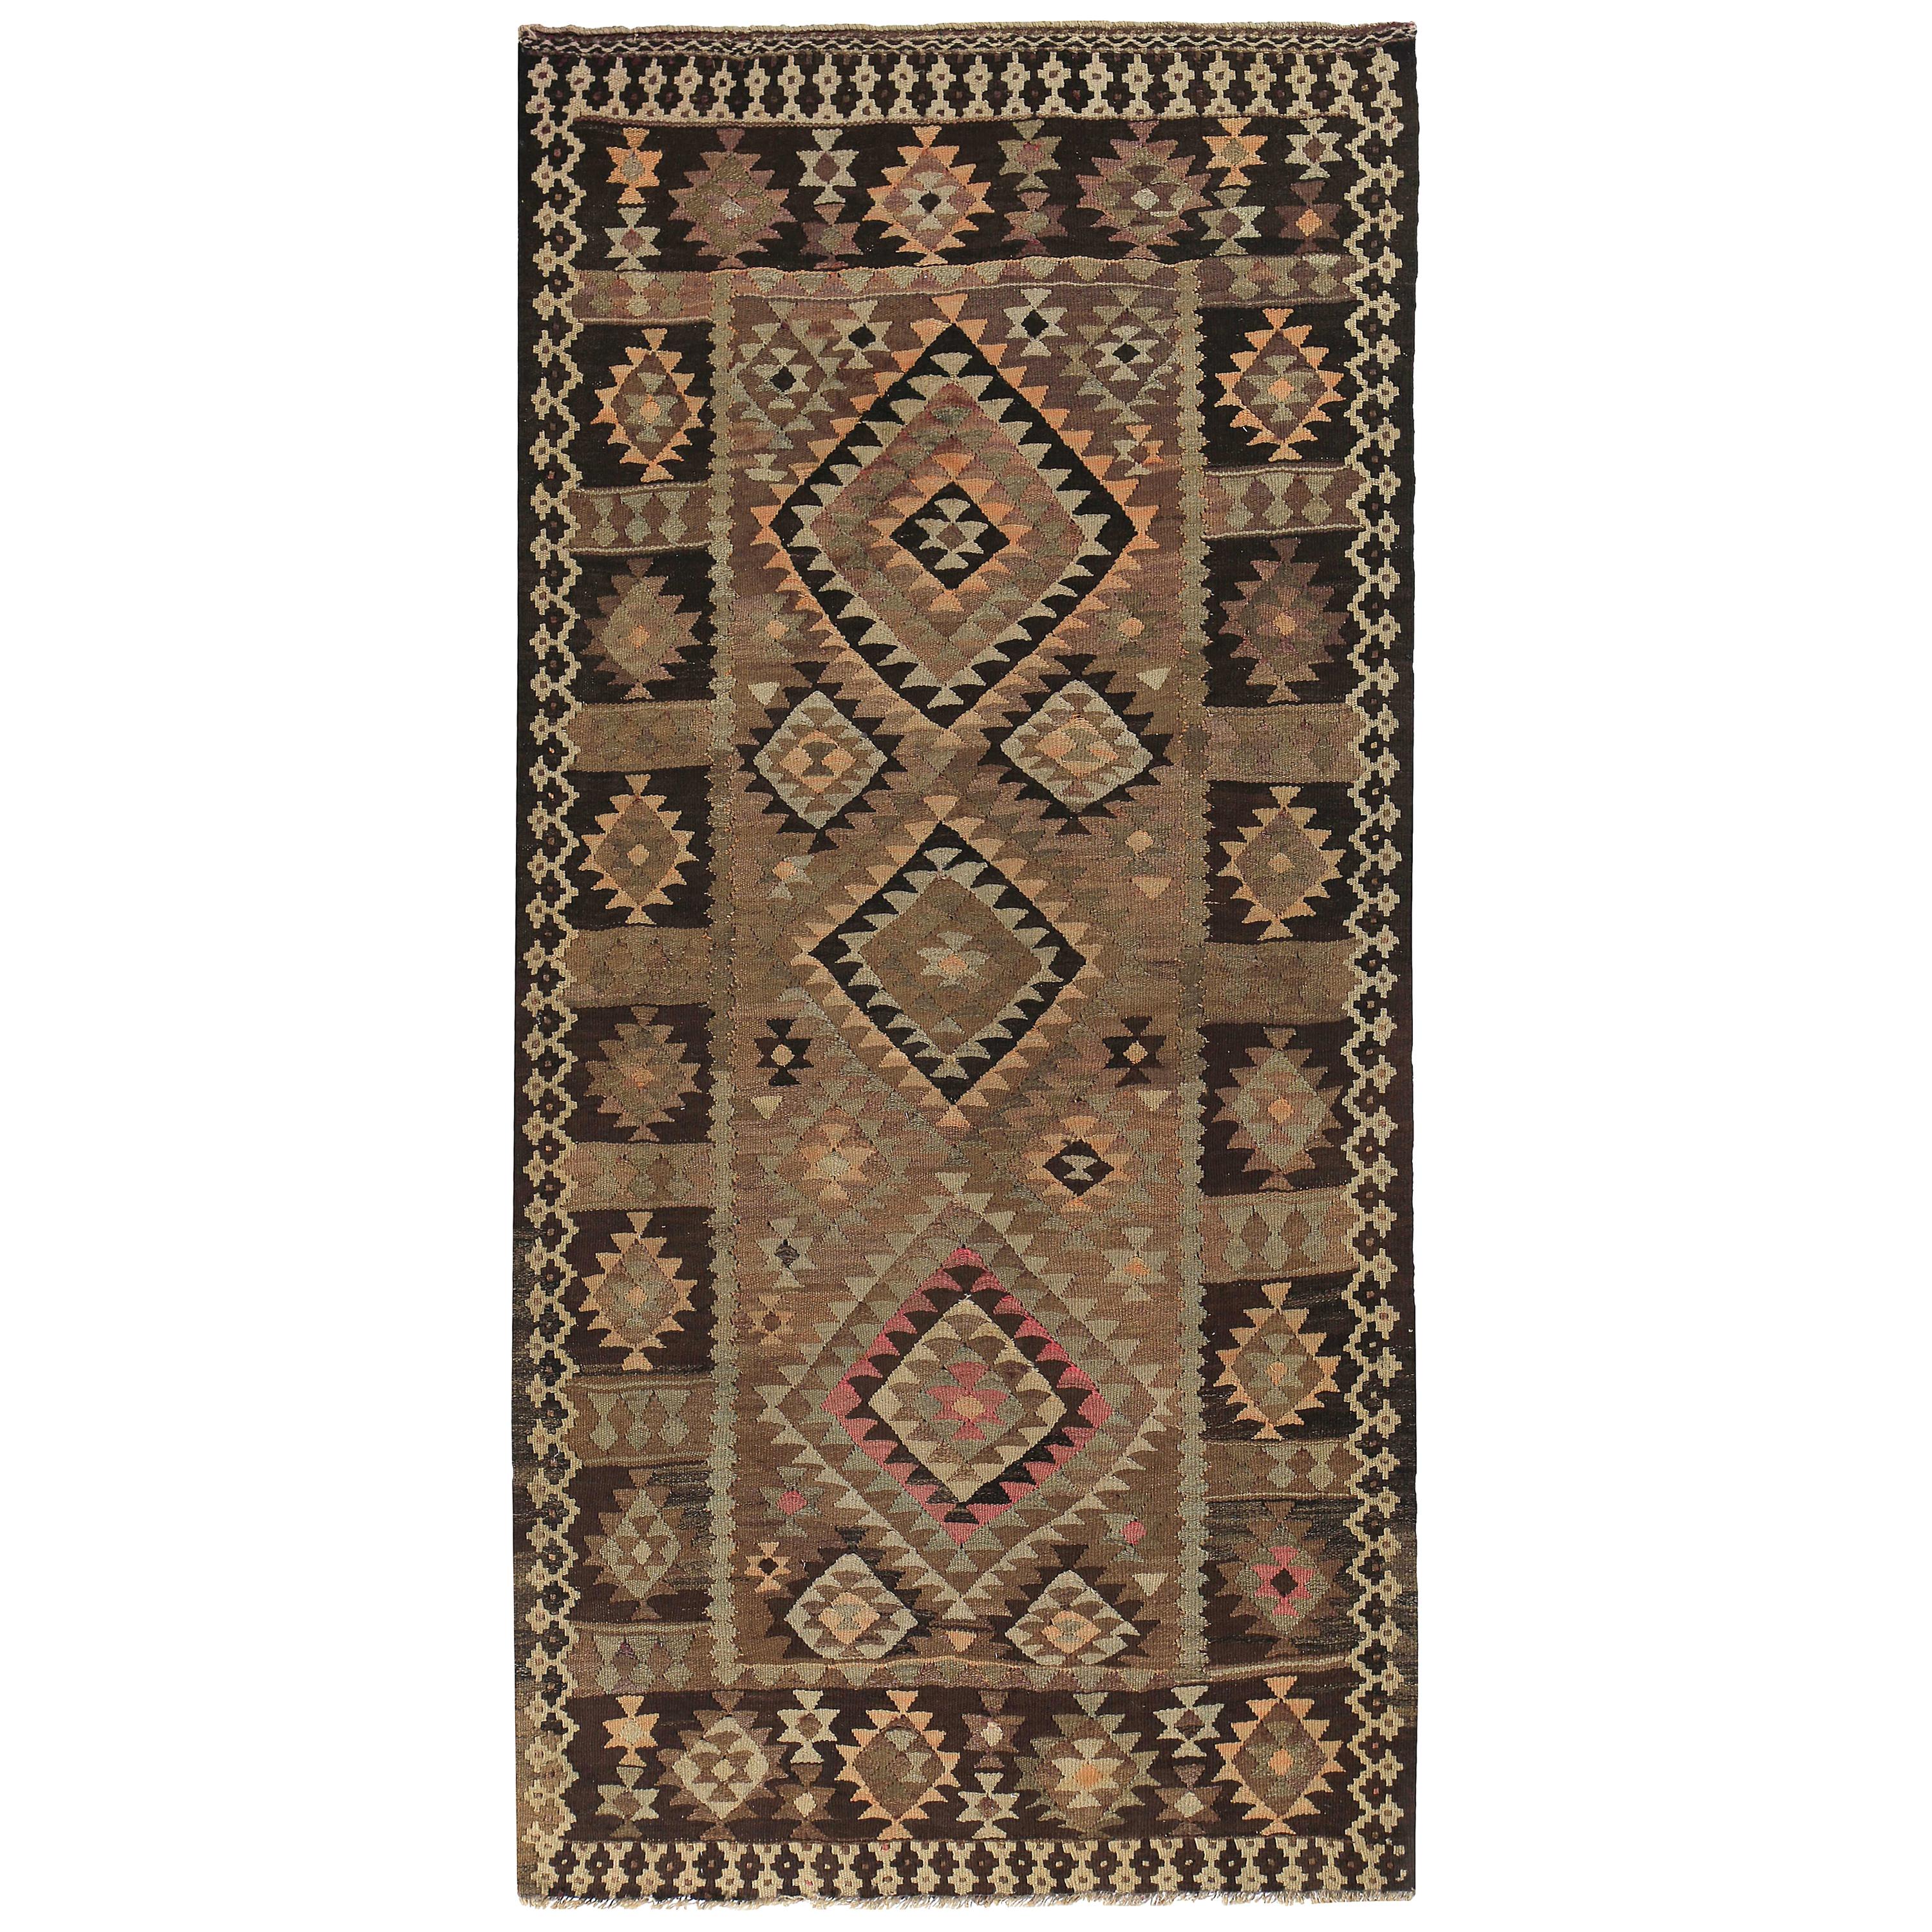 New Turkish Kilim Rug with Pink and Ivory Medallions on Brown Field